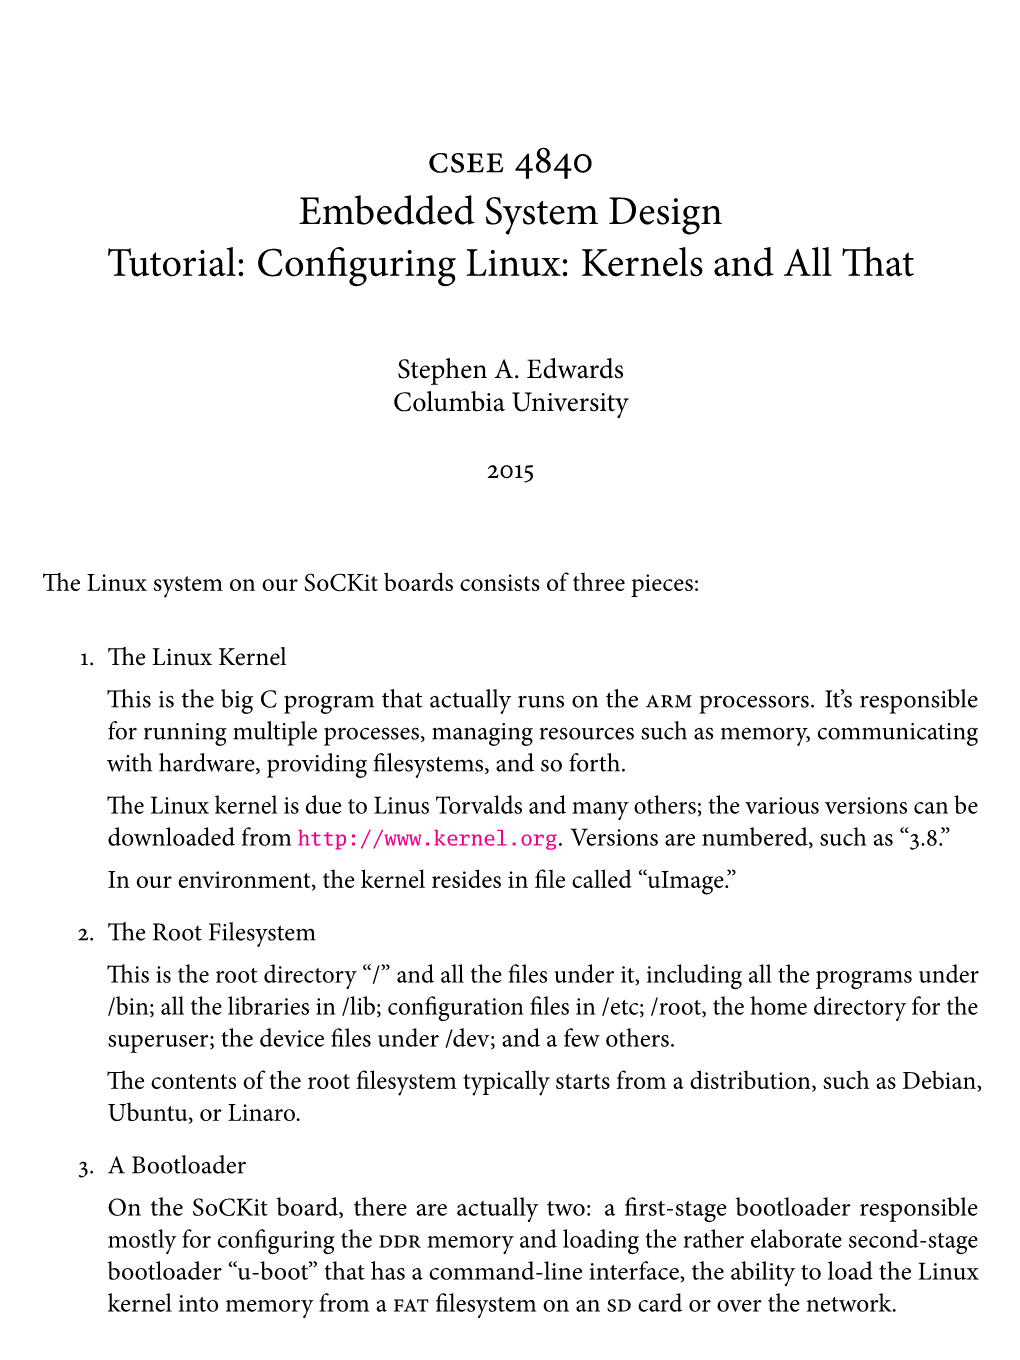 Embedded System Design Tutorial: Configuring Linux: Kernels and All